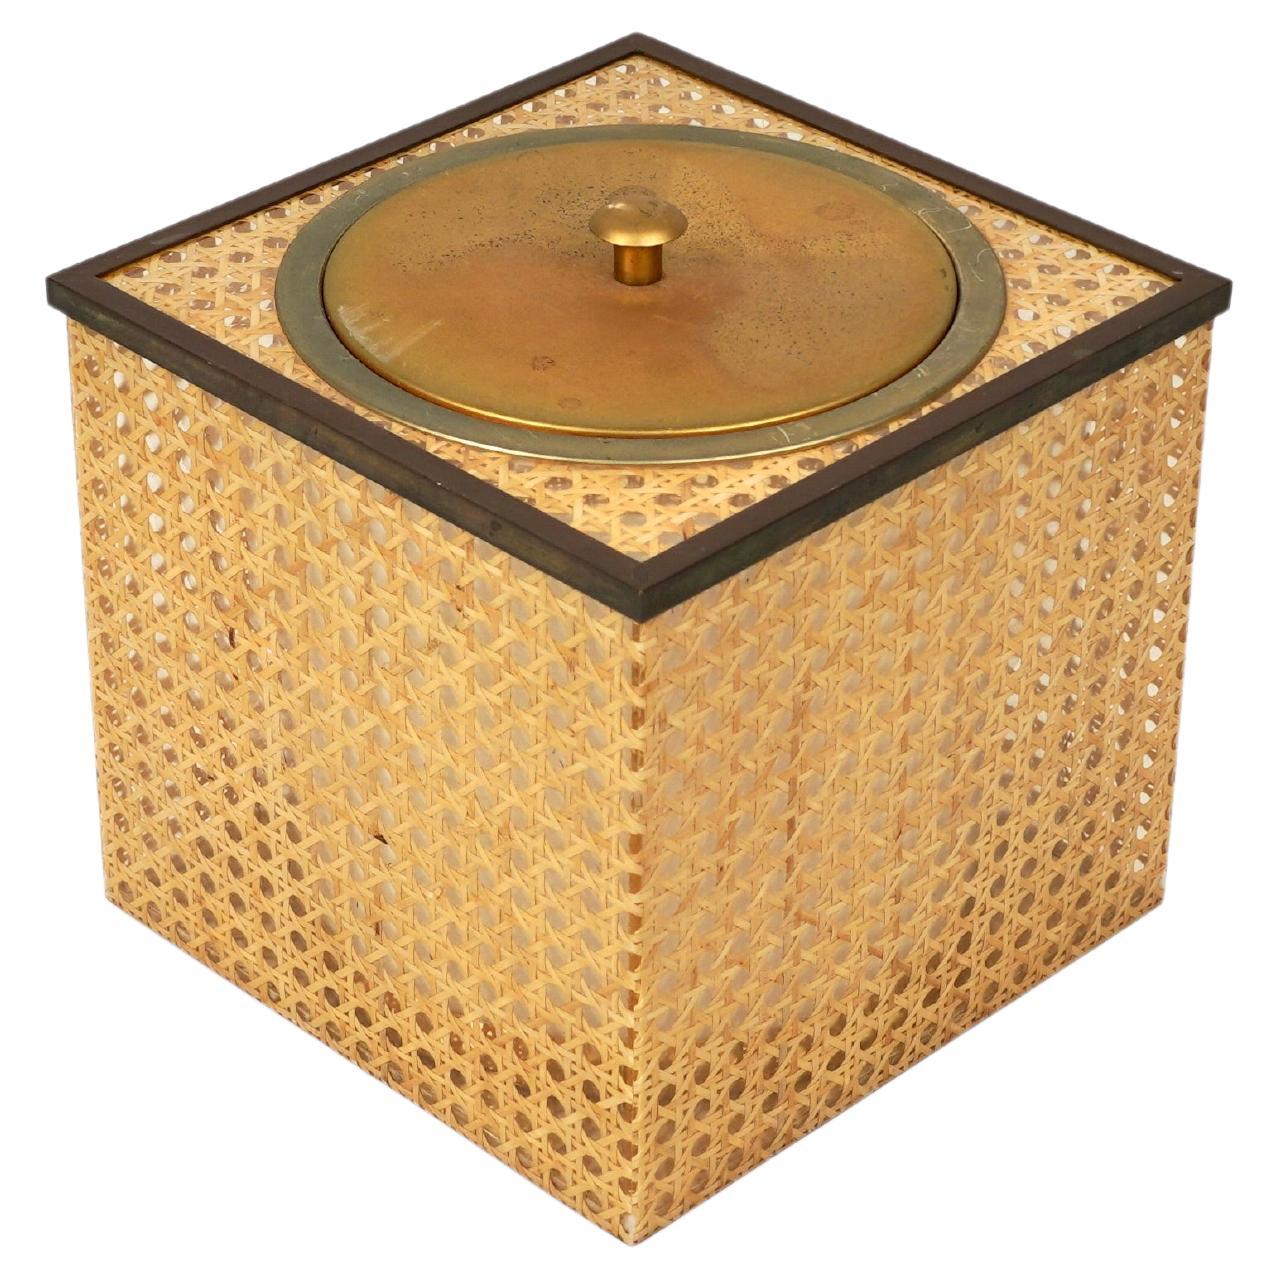 Cube Ice Bucket in Lucite, Rattan and Brass Christian Dior Style, Italy, 1970s